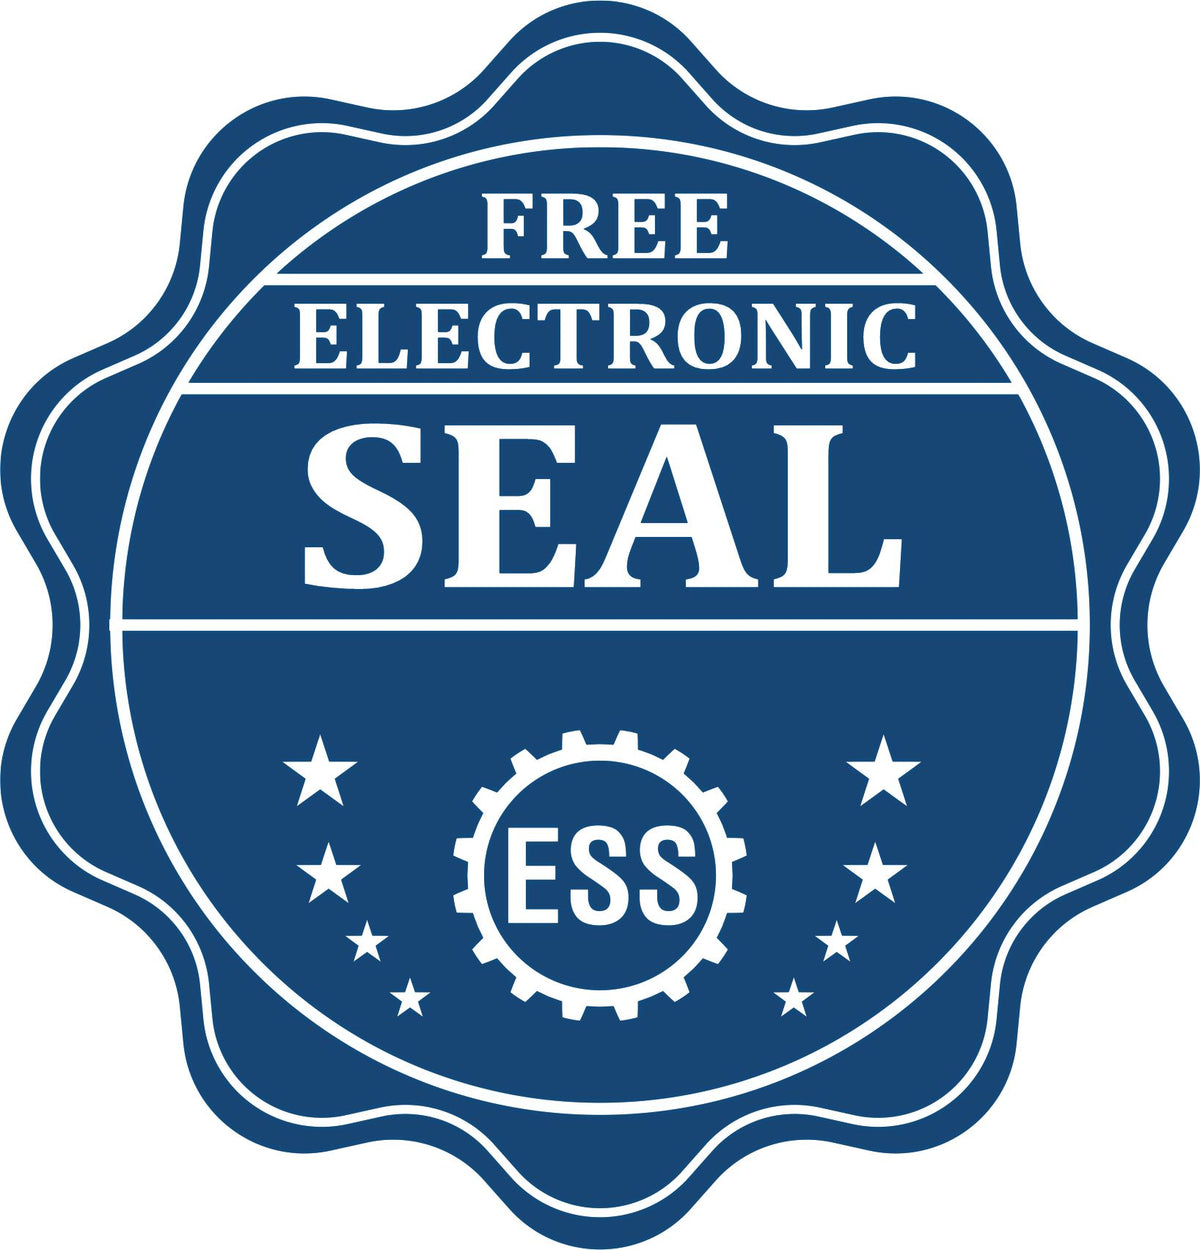 A badge showing a free electronic seal for the Slim Pre-Inked Florida Professional Geologist Seal Stamp with stars and the ESS gear on the emblem.